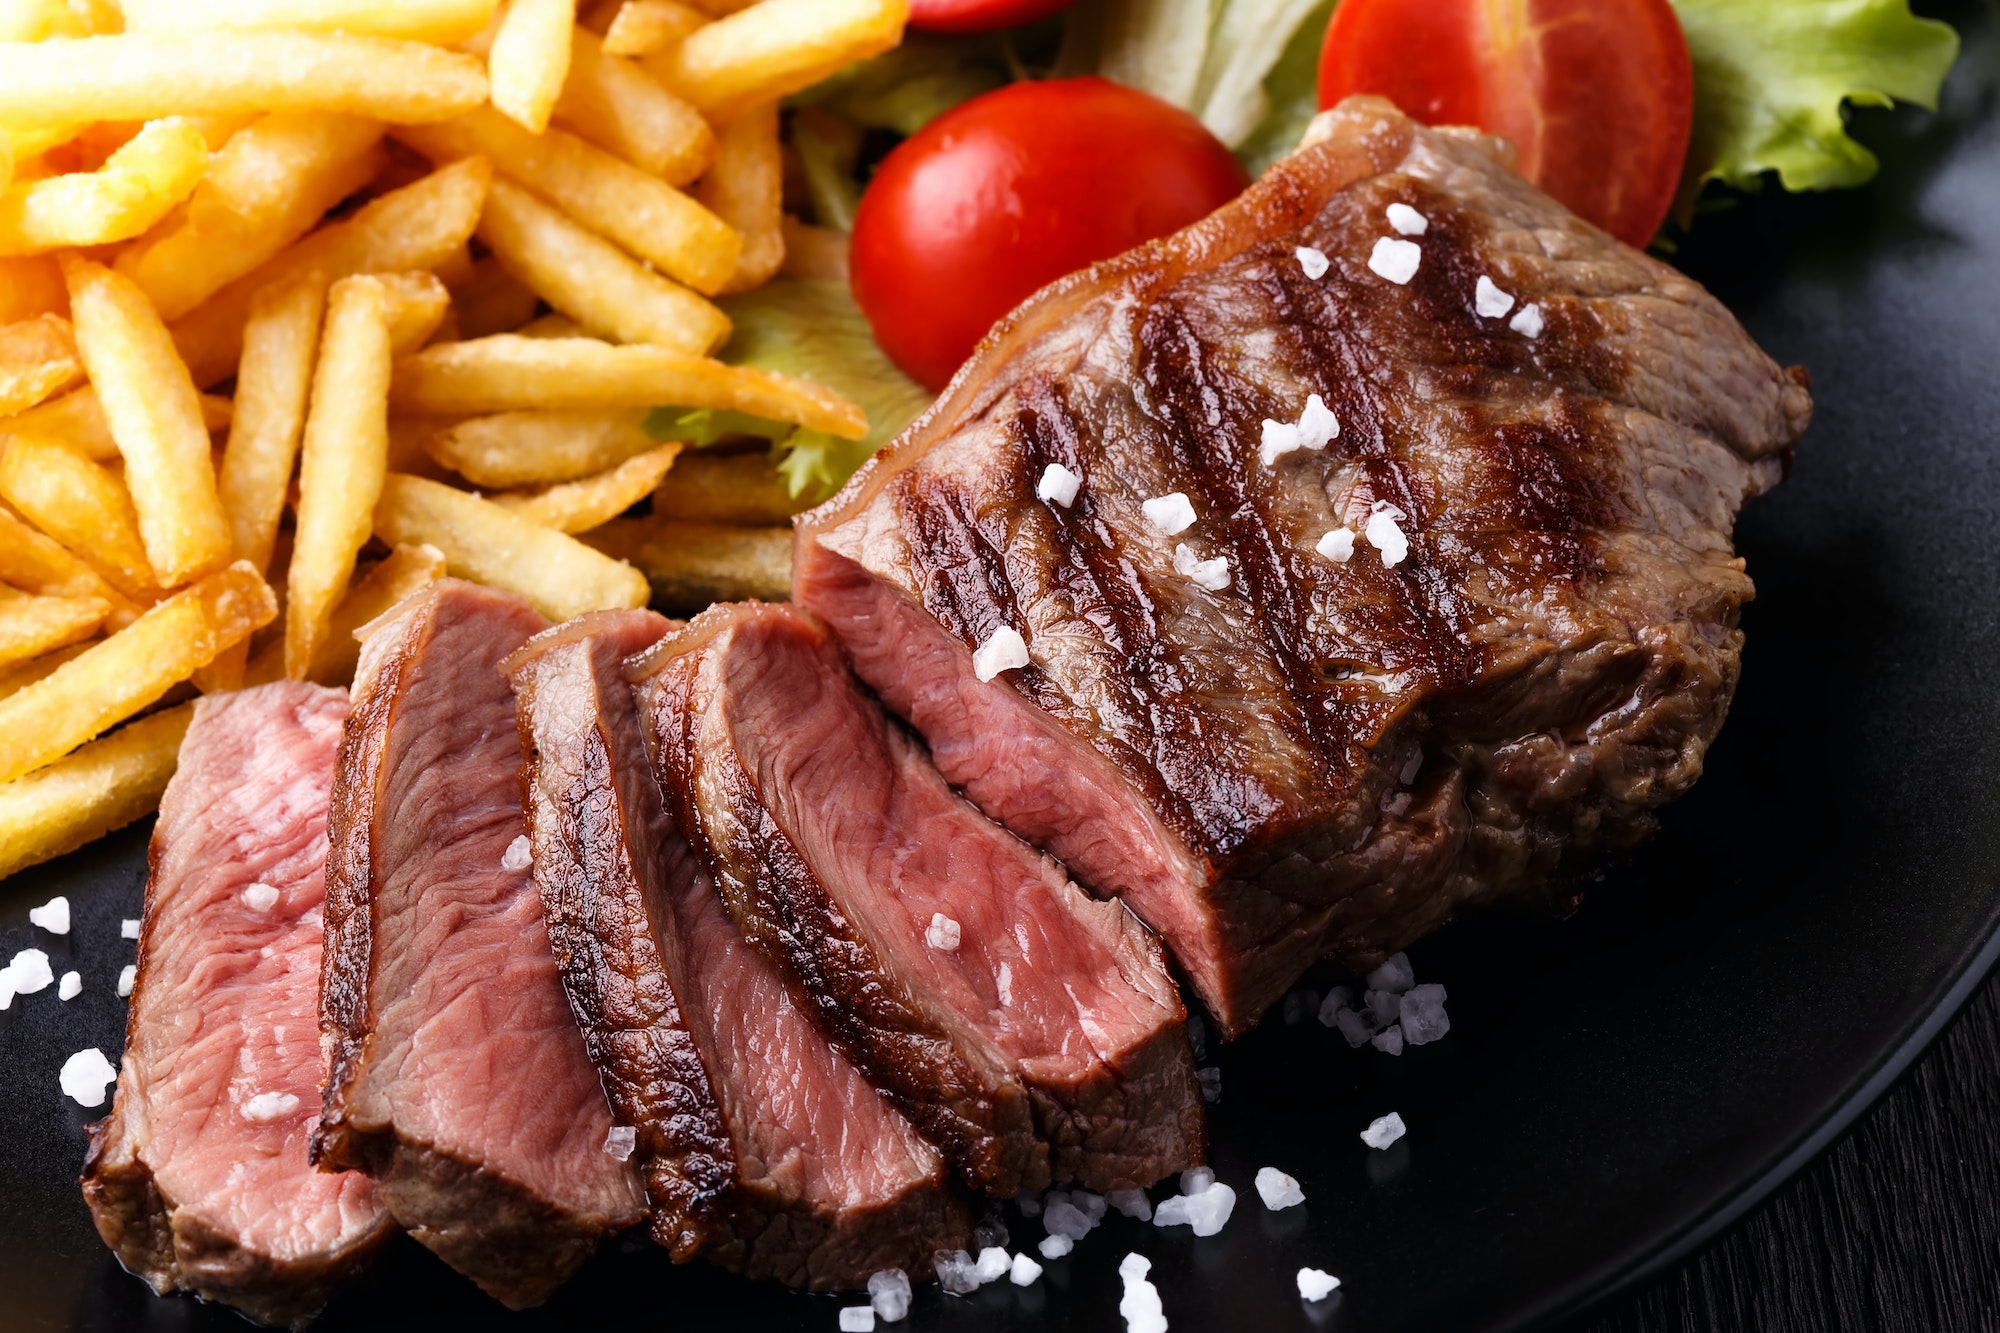 New York steak with french fries